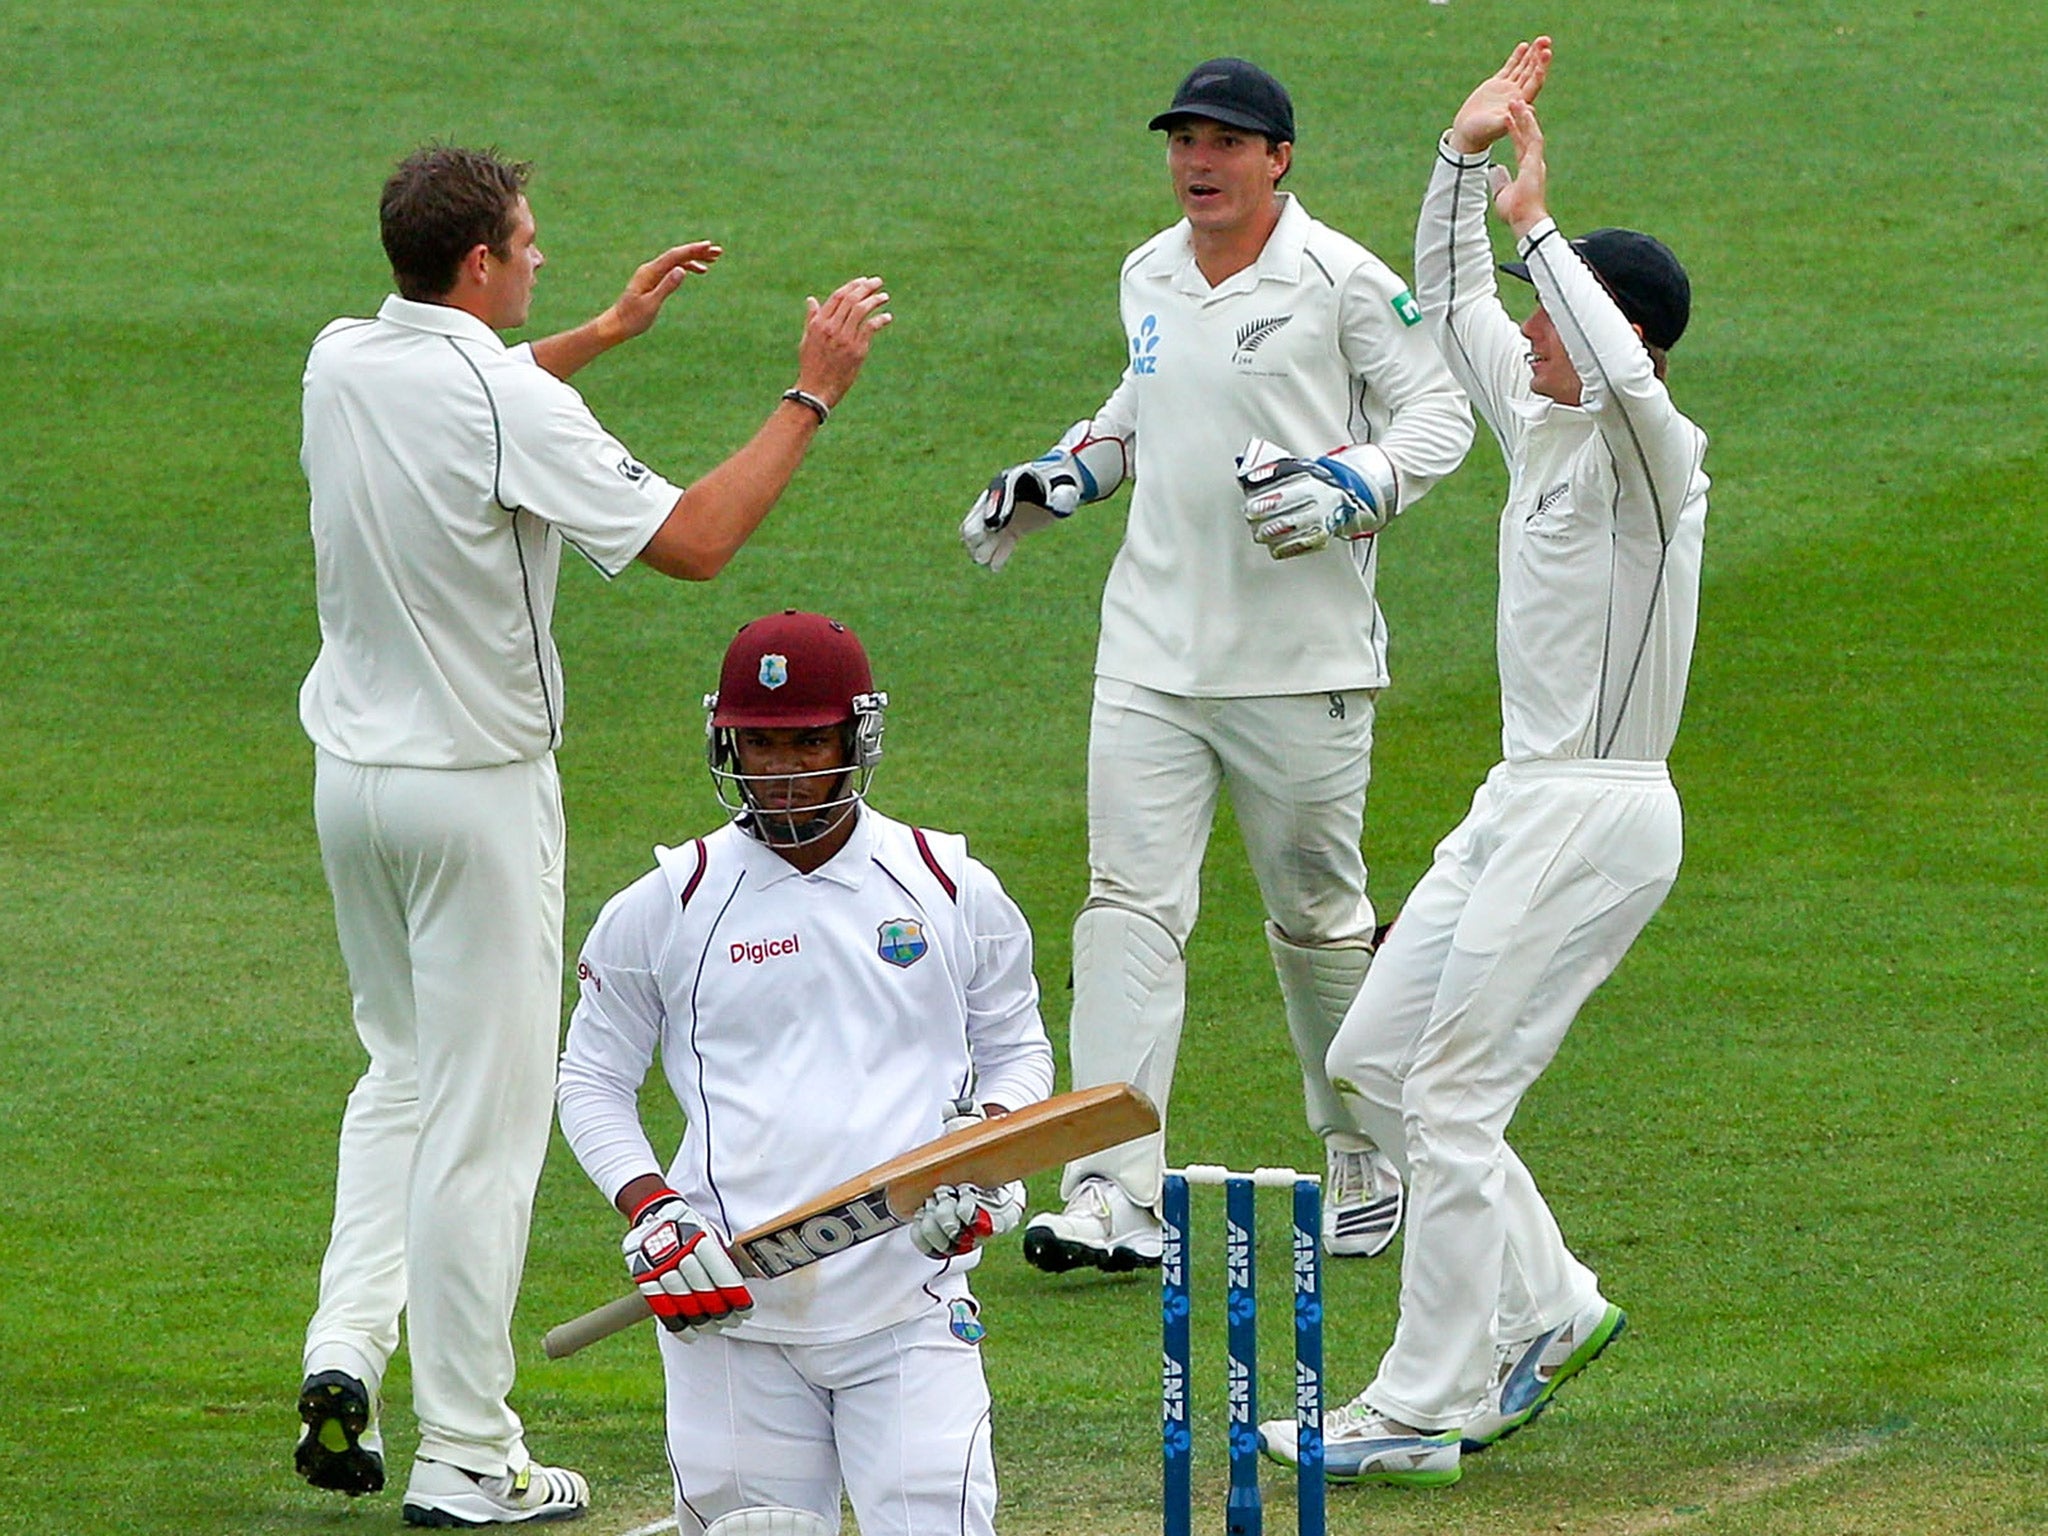 West Indies batsman Kieran Powell trudges off following his side’s defeat to New Zealand in 2013